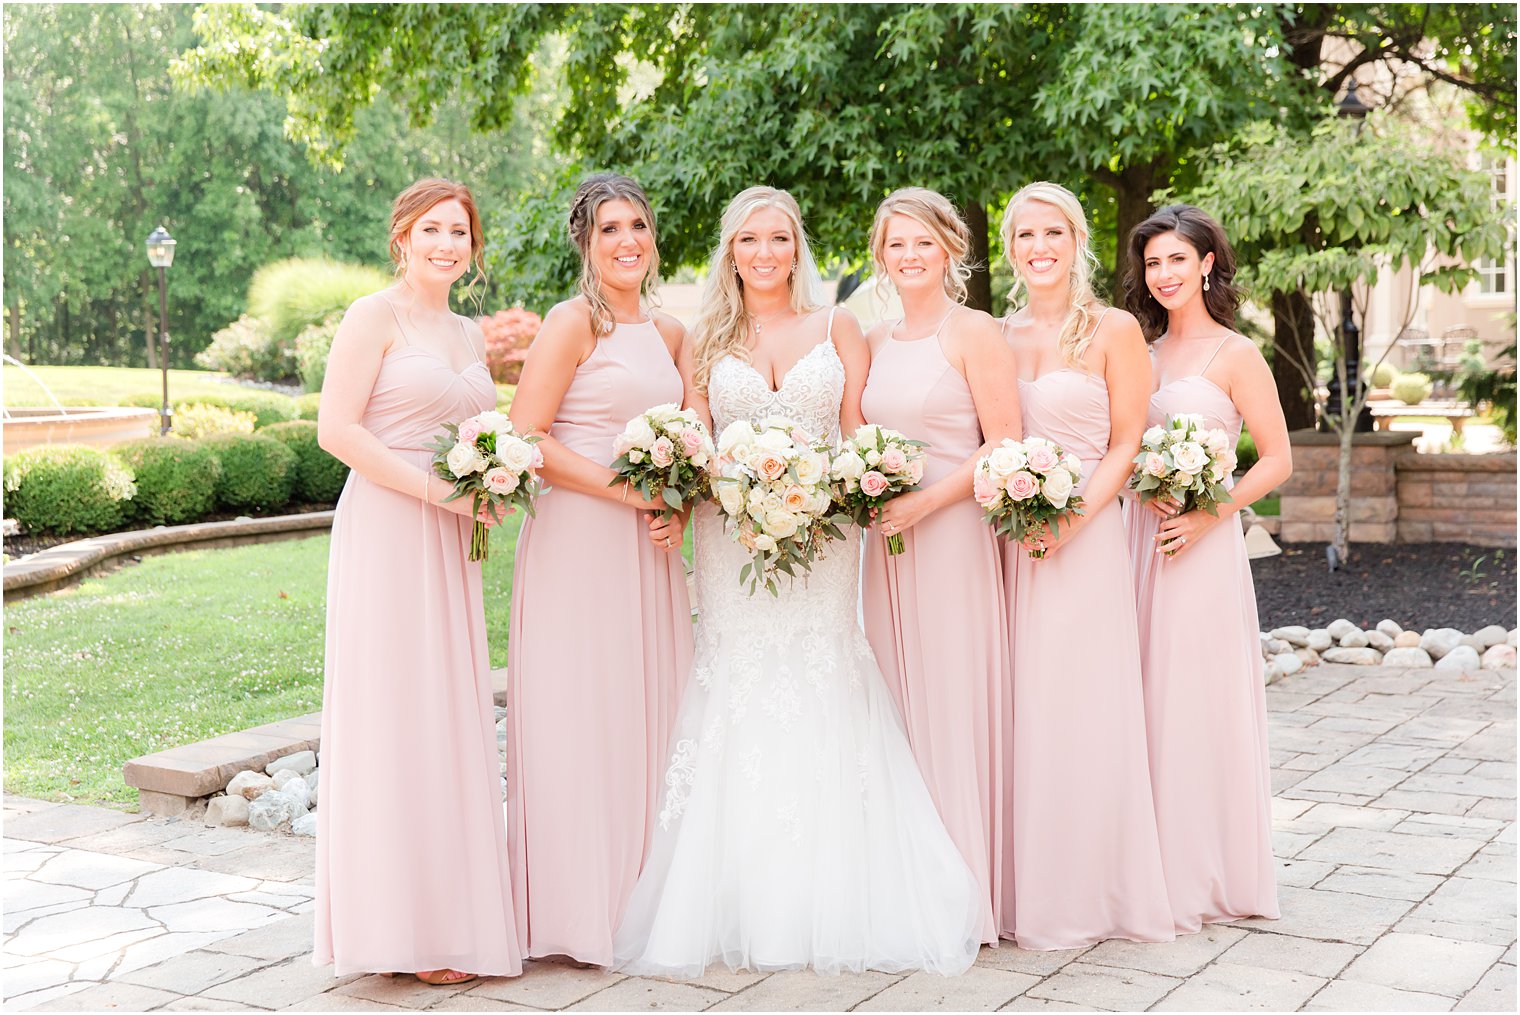 bride poses with bridesmaids in pink gowns with white rose bouquets